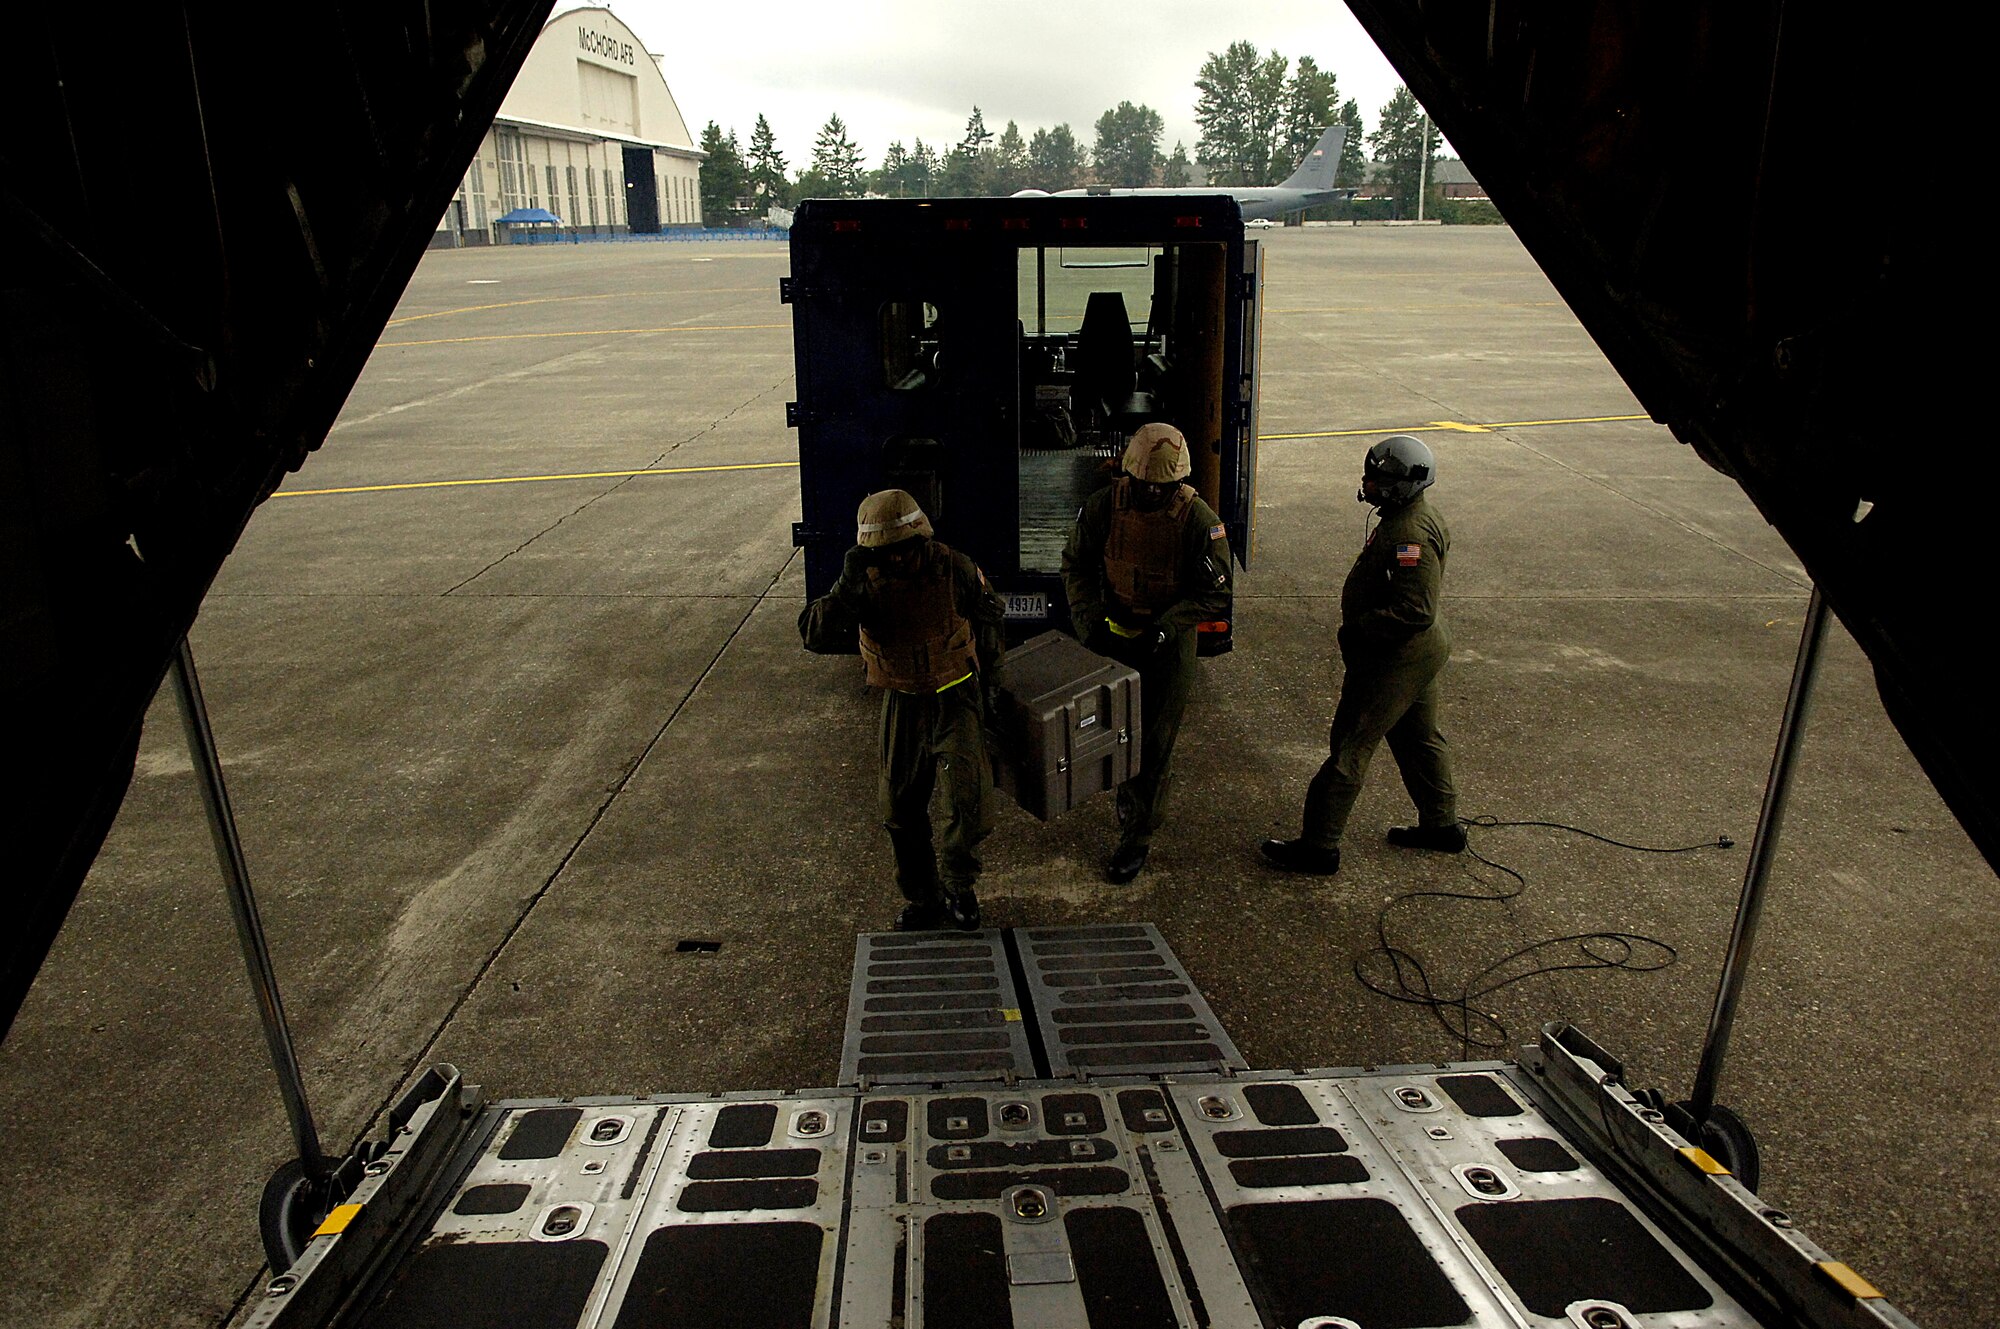 Tech. Sgt. Kermit McLauchin and Tech. Sgt. Ricardo Brown load medical supplies on a C-130 Hercules for a aeromedical evacuation competition July 23 during Air Mobility Command's Rodeo 2007 at McChord Air Force Base, Wash. Rodeo 2007 is a readiness competition of U.S. and international mobility air forces. The NCOs are medical technicians assigned to the from the 375th Aeromedical Evacuation Squadron at Scott AFB, Ill. (U.S. Air Force photo/Tech. Sgt. Jeremy T. Lock)
